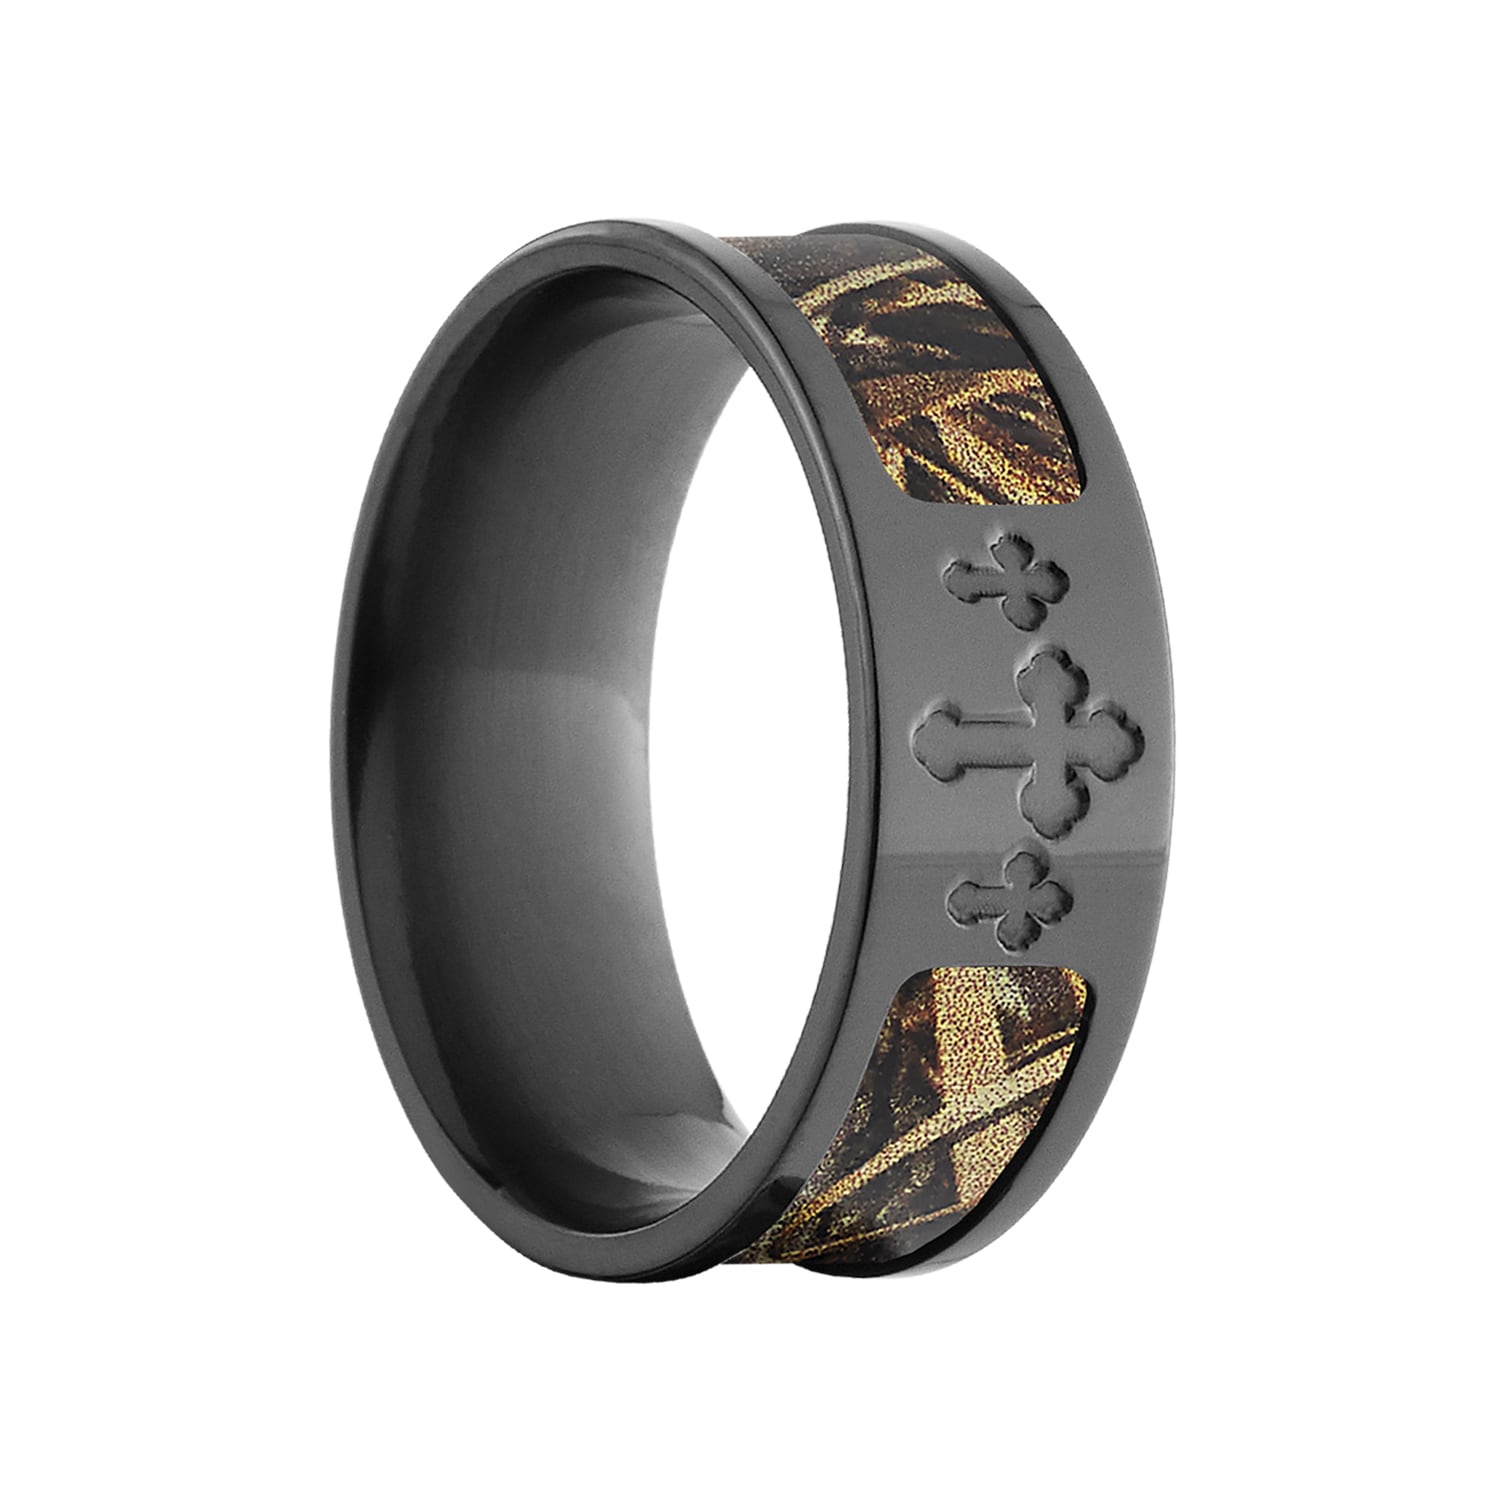 Official Realtree The Jewelry Source Titanium Camo Rings Fish Hook Ring 